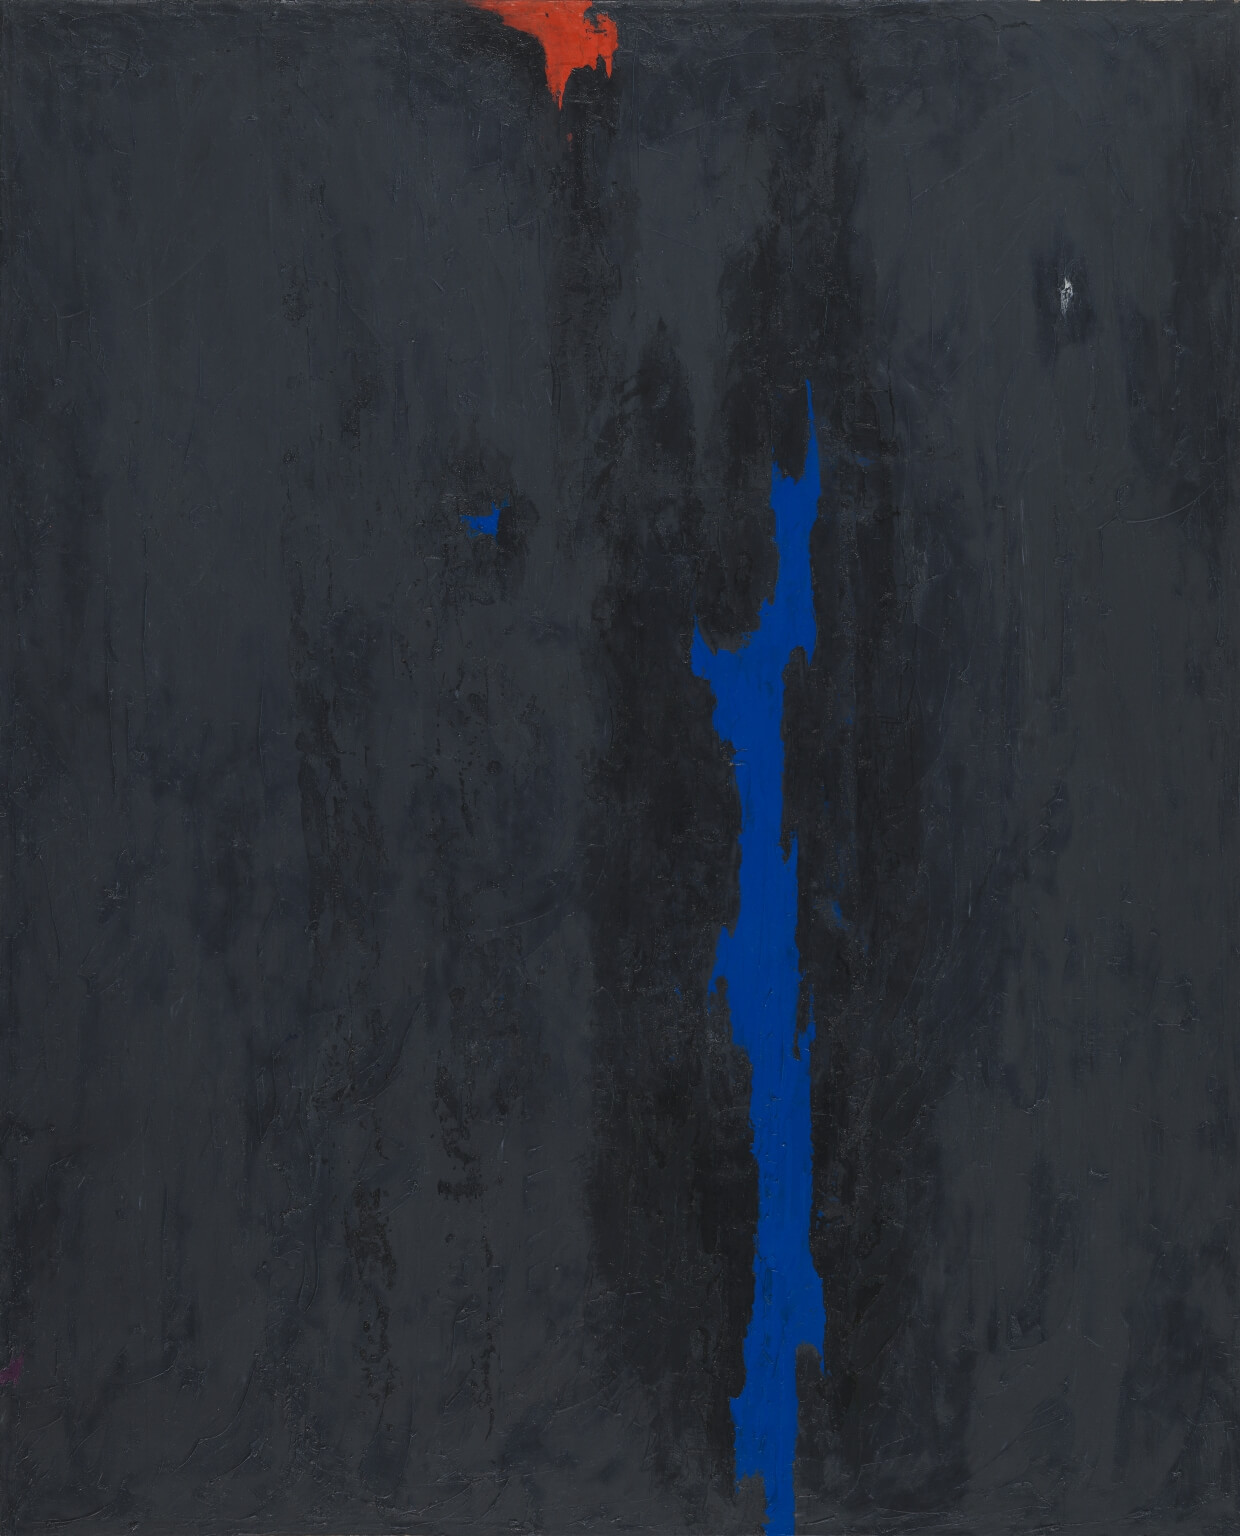 An abstract mostly black painting with a blue vertical line through the middle and a red spot at the top